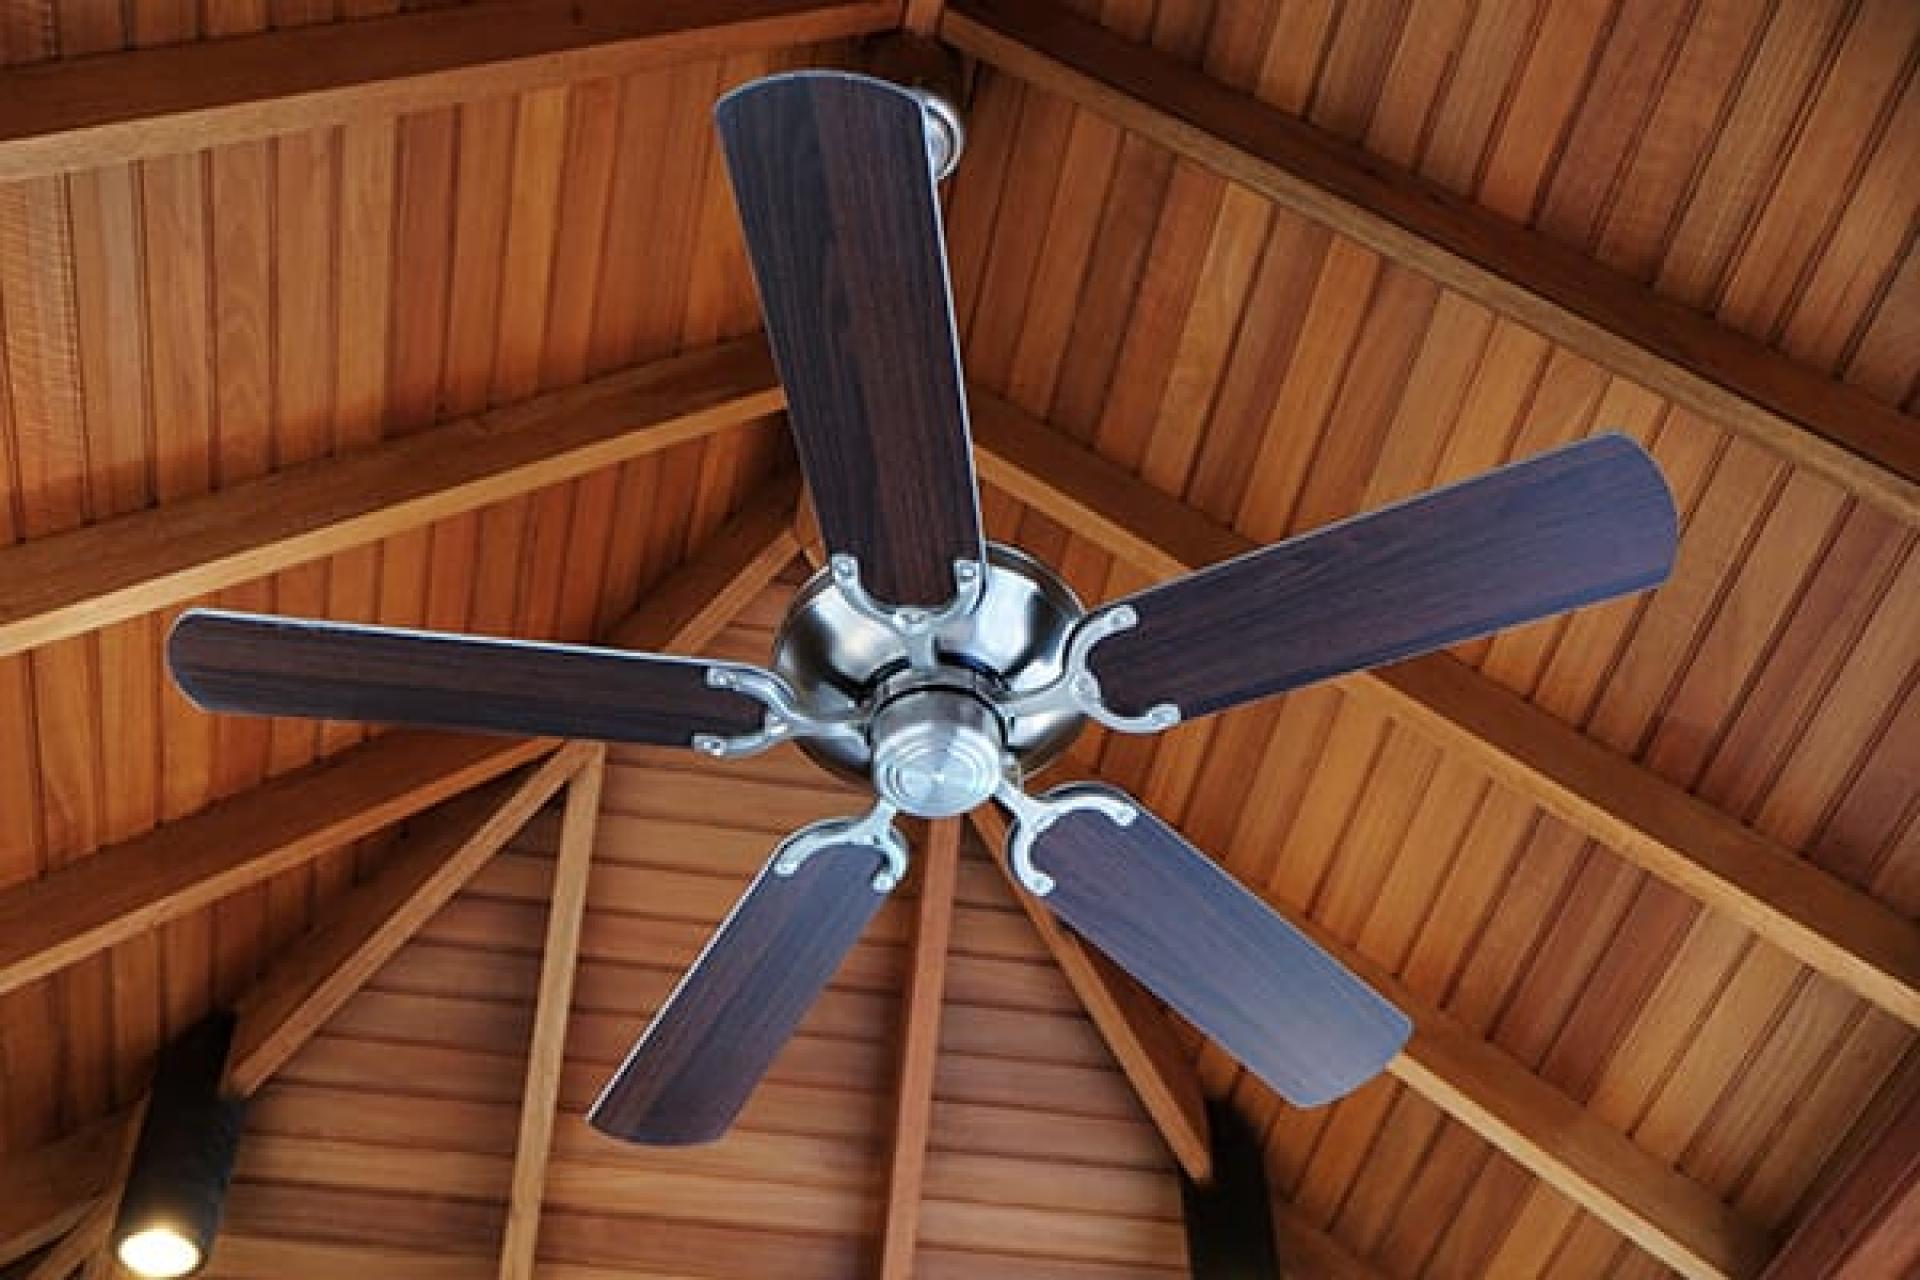 Cleaning Your Ceiling Fan Is Easy With These 6 Simple Steps